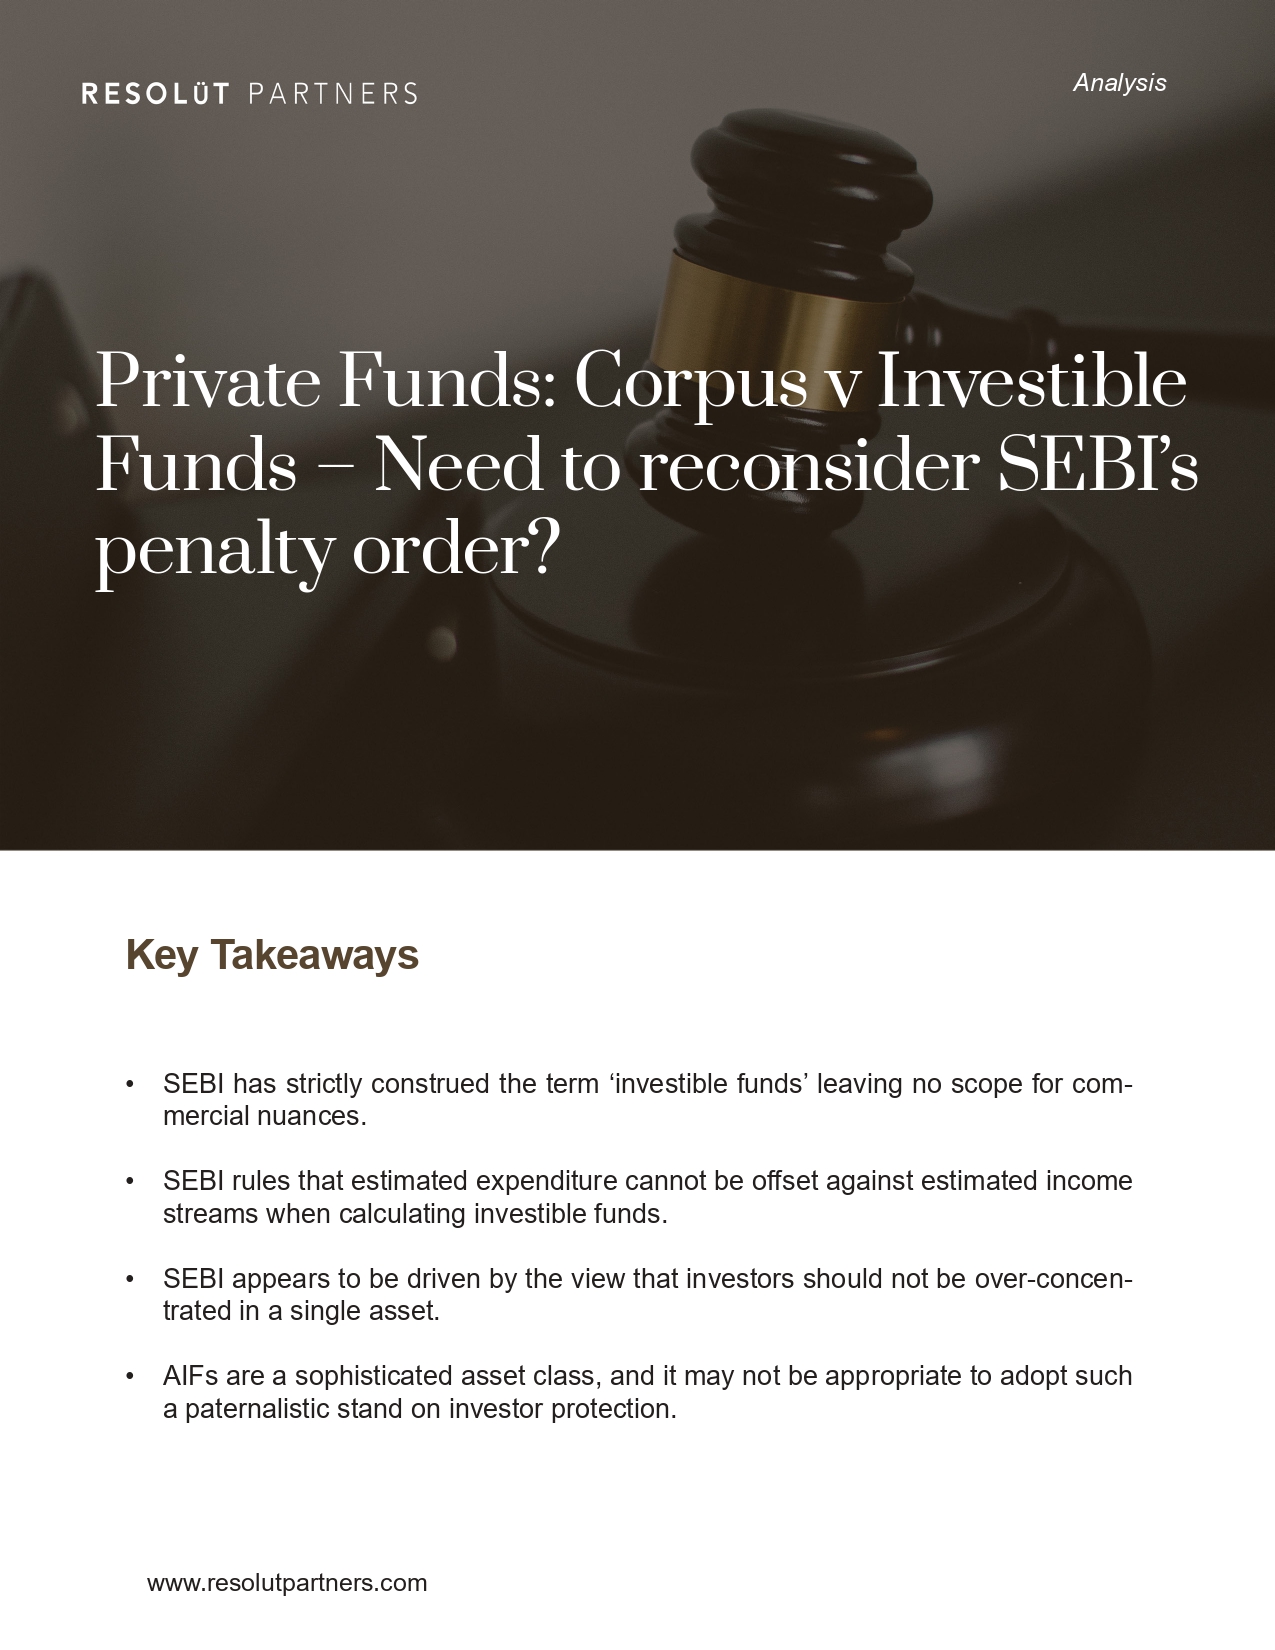 Corpus v Investible Funds (2) - Resolut Partners_page-0001